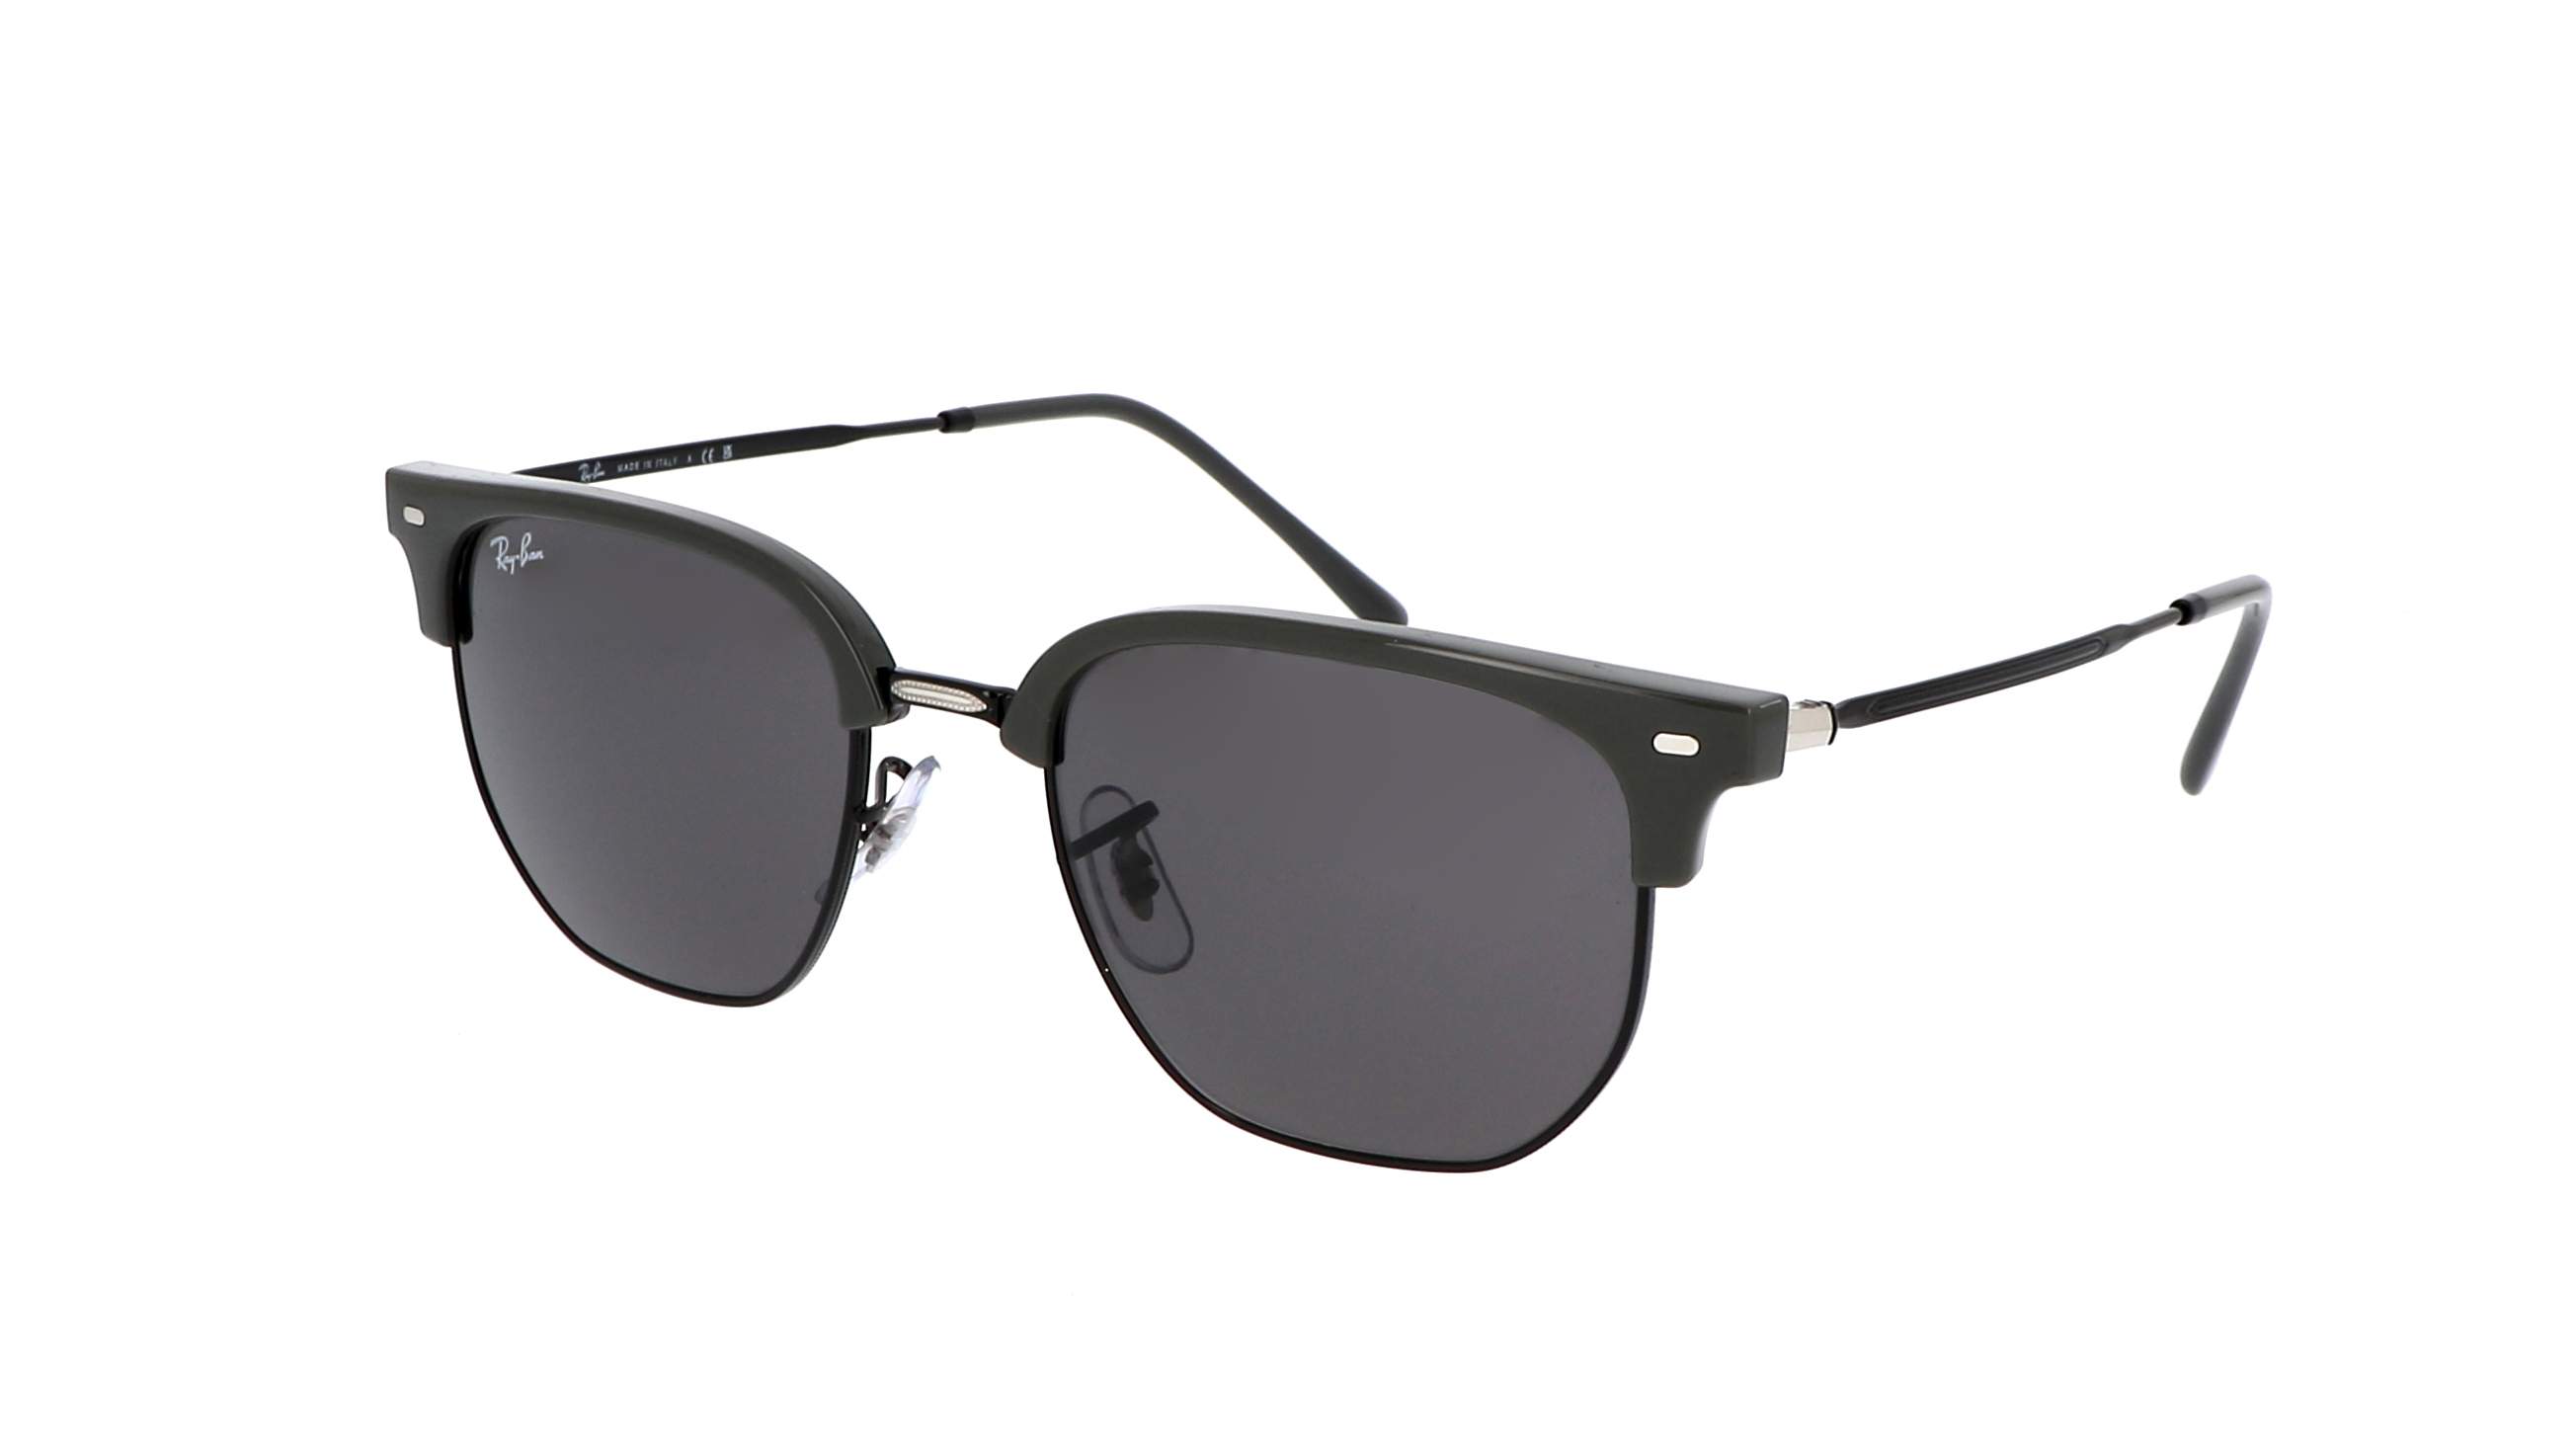 Sunglasses Ray-ban New clubmaster RB4416 6653/B1 51-20 Grey on black in ...